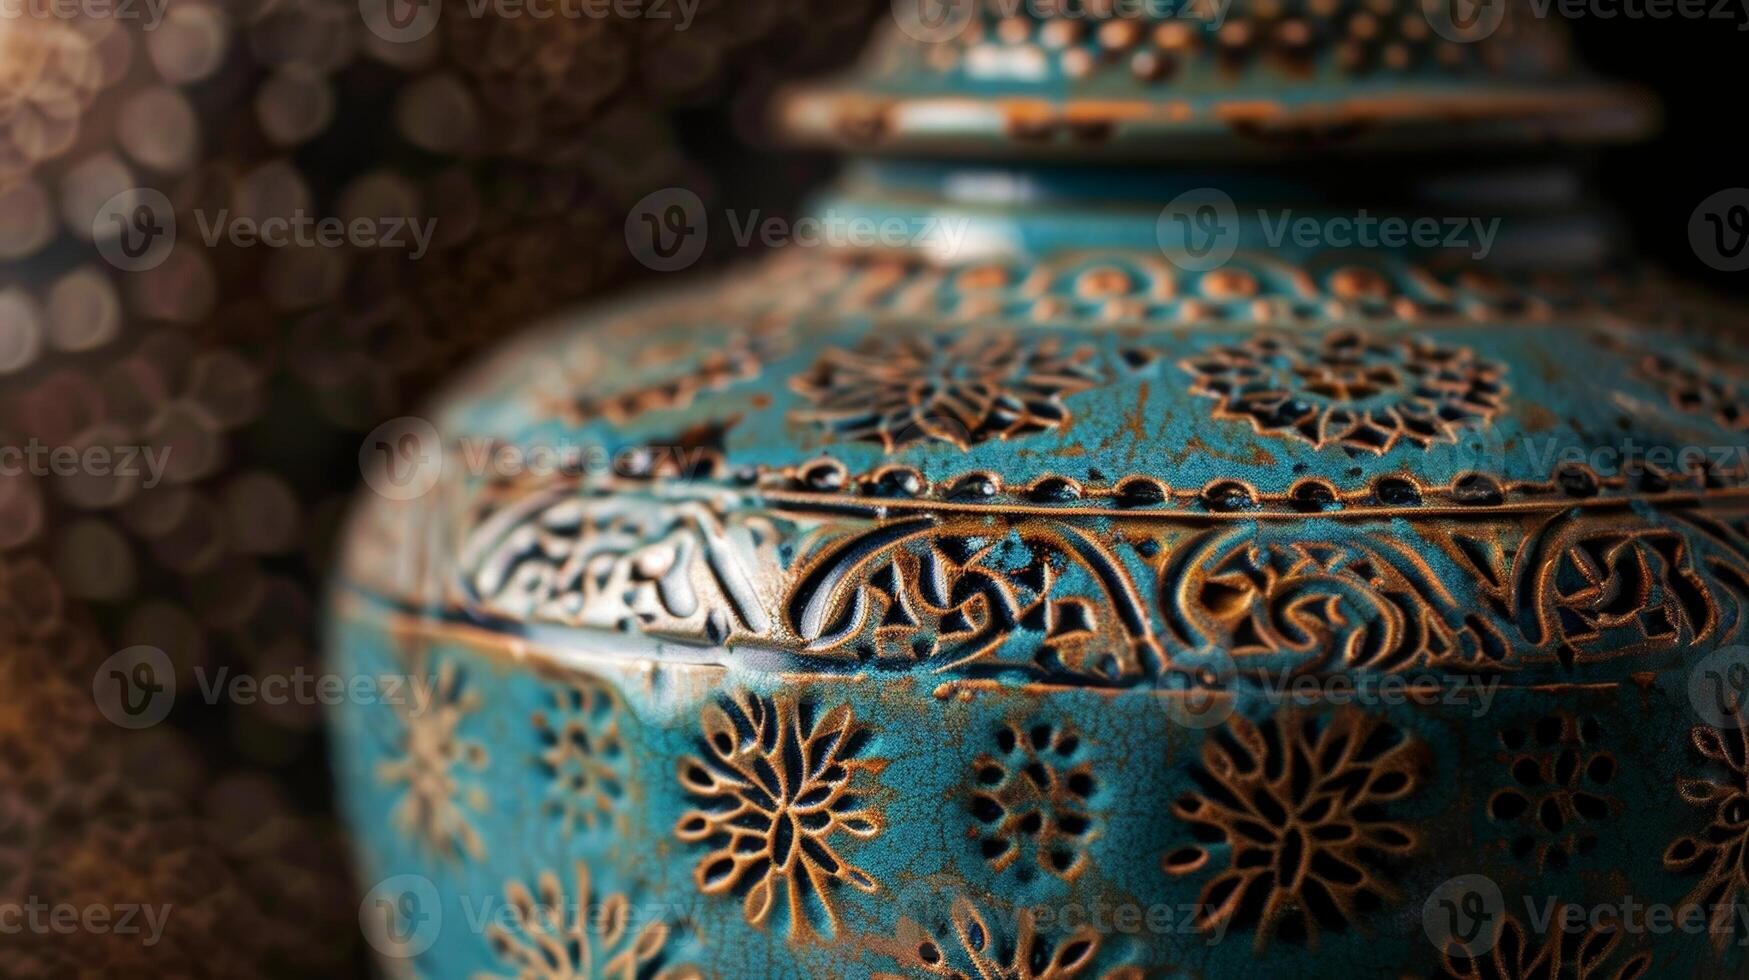 A decorative ceramic jar with a rich intricate pattern reminiscent of Middle Eastern textiles. photo